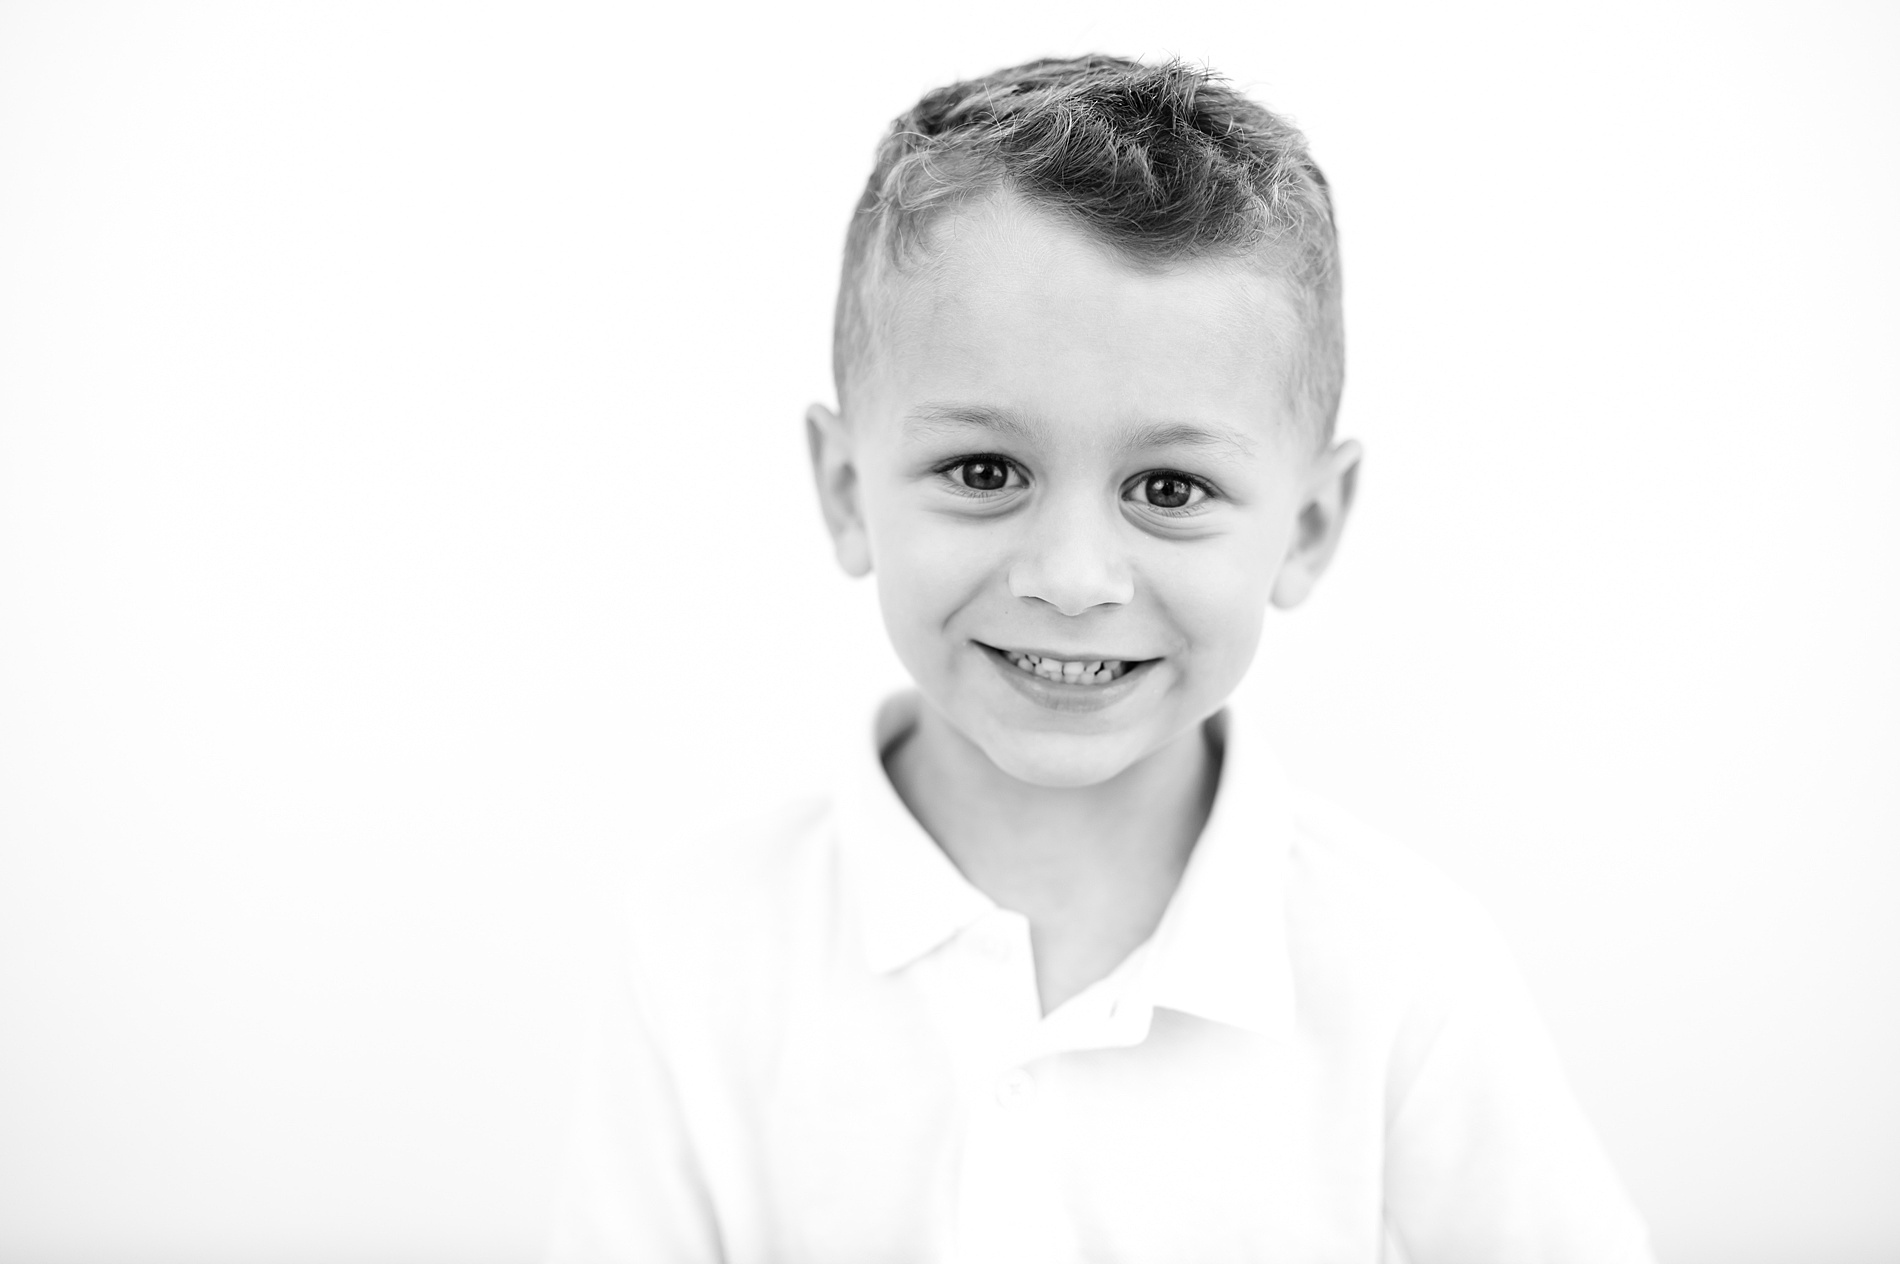 Black and White children personality Portraits photographed by Lindsey Dutton Photography, a Dallas family photographer